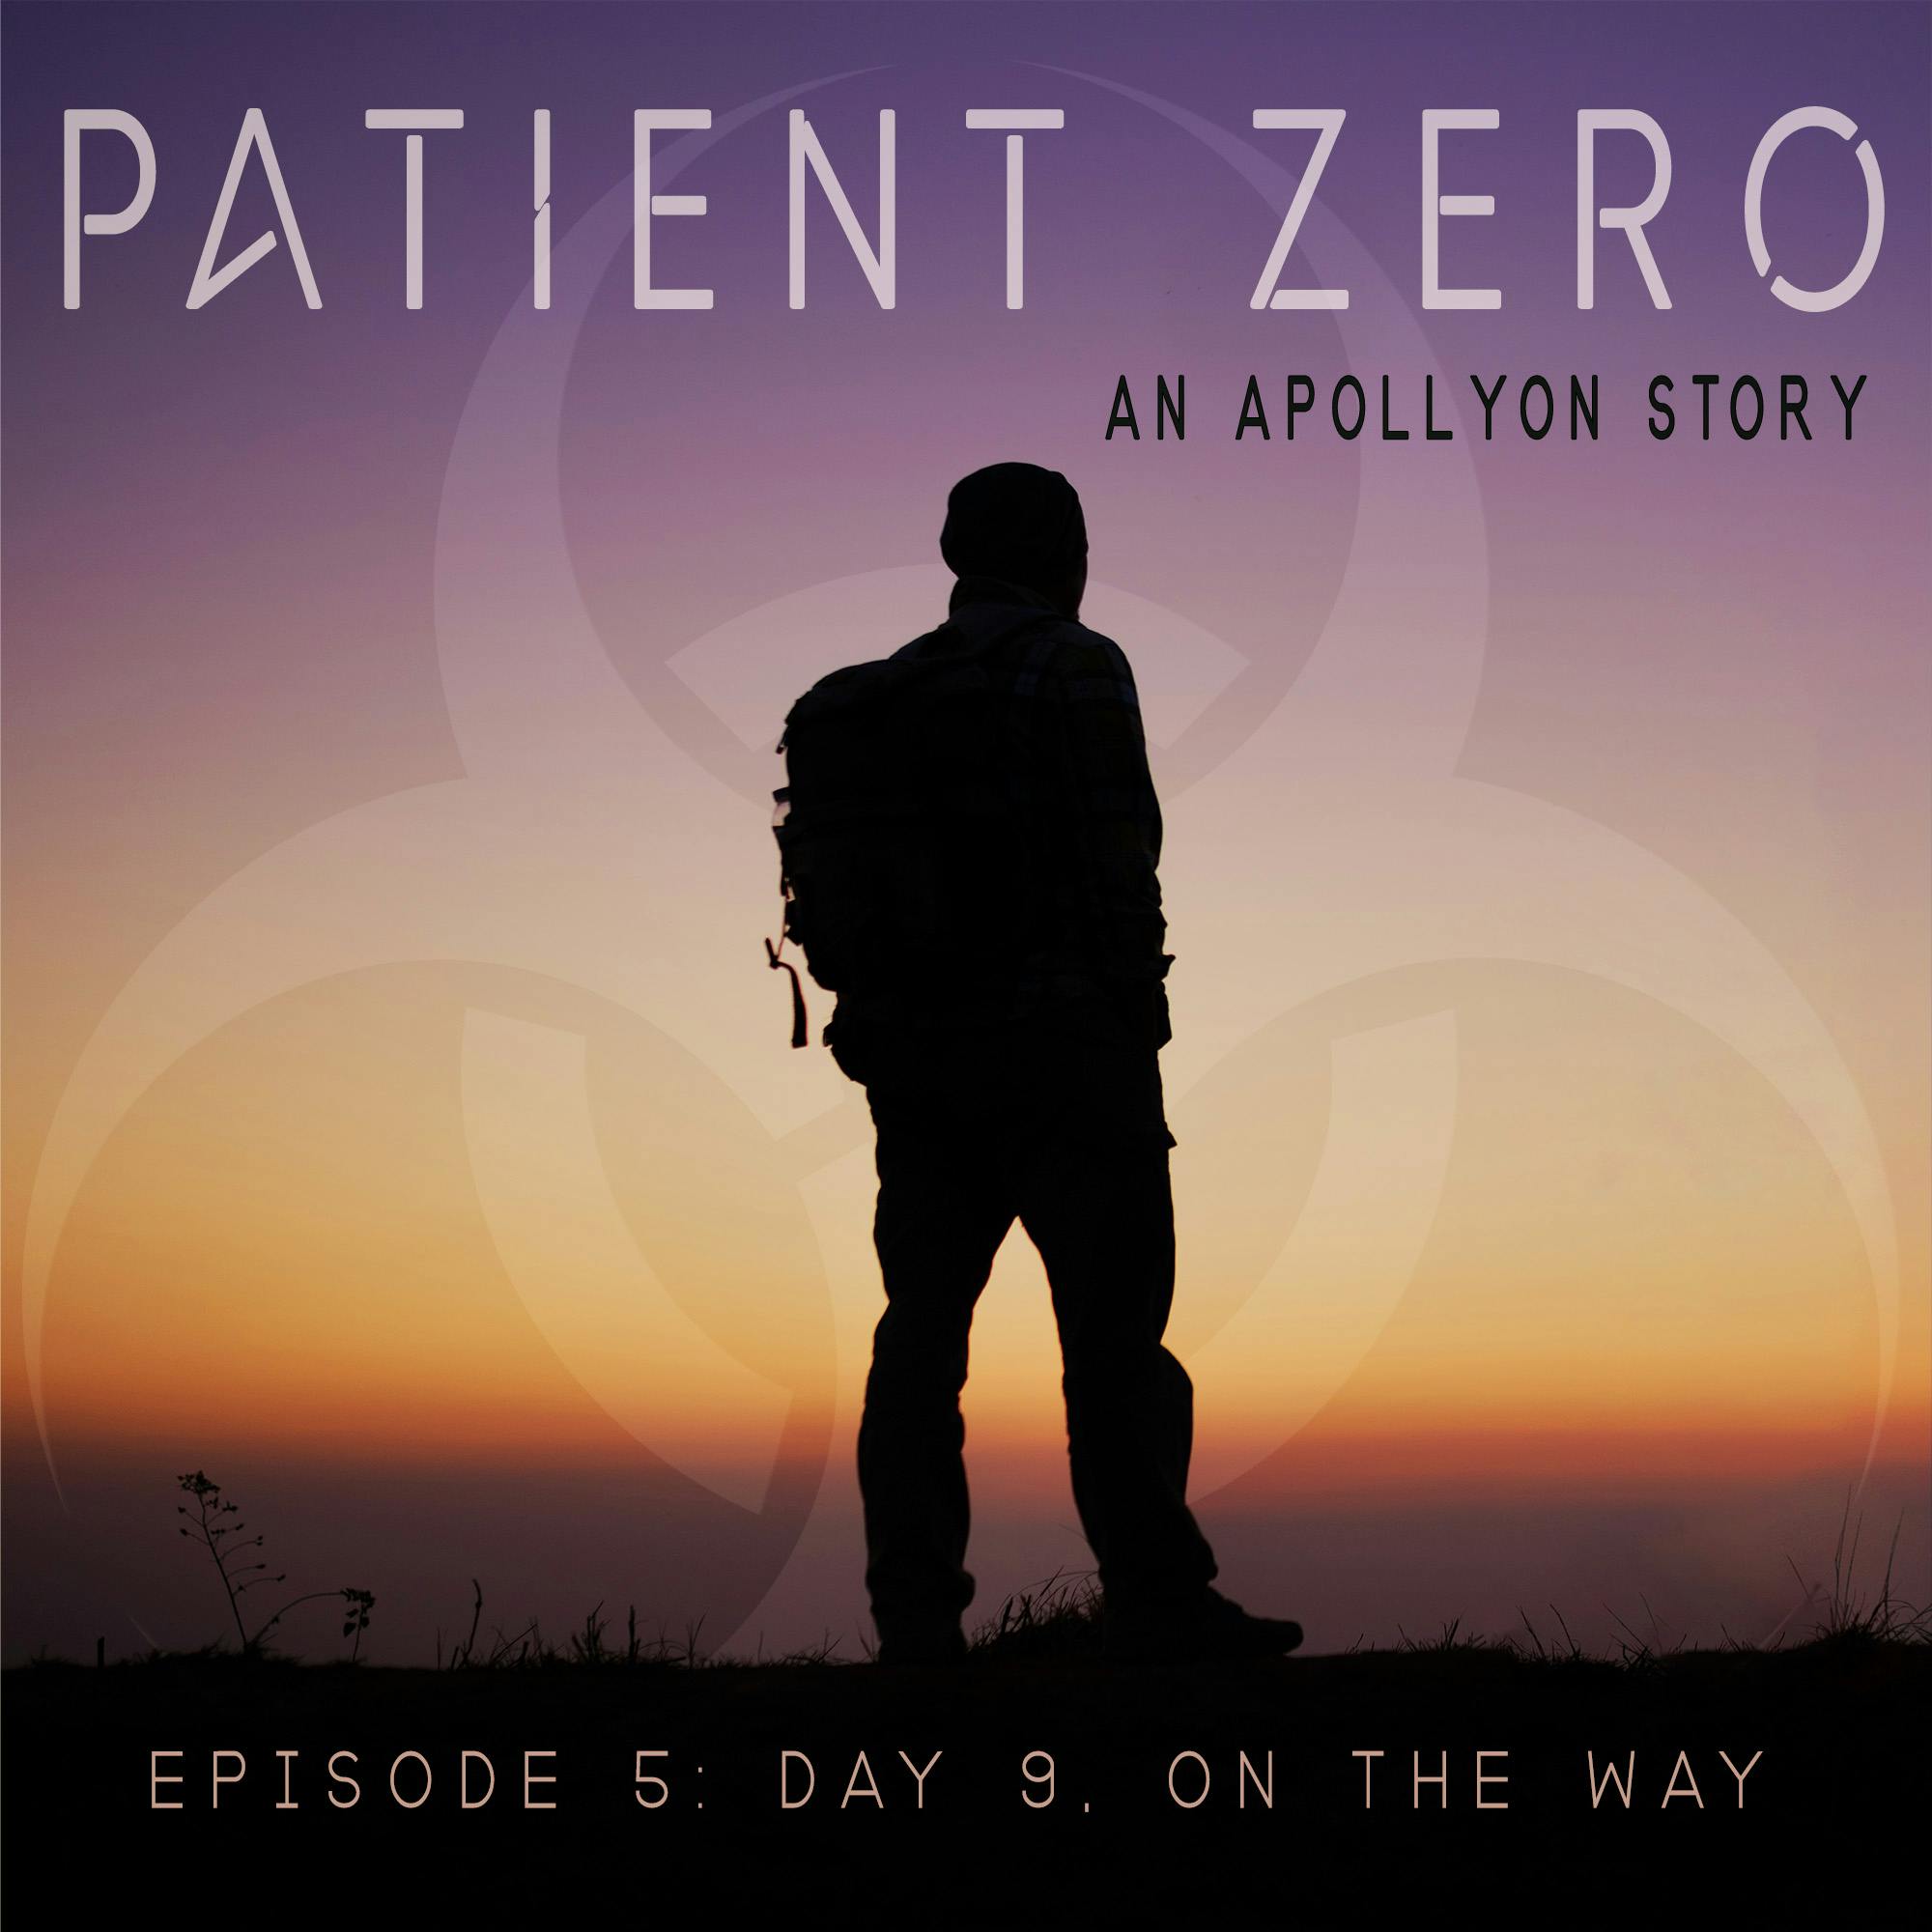 Patient Zero, Episode 5: Day 9, On the Way